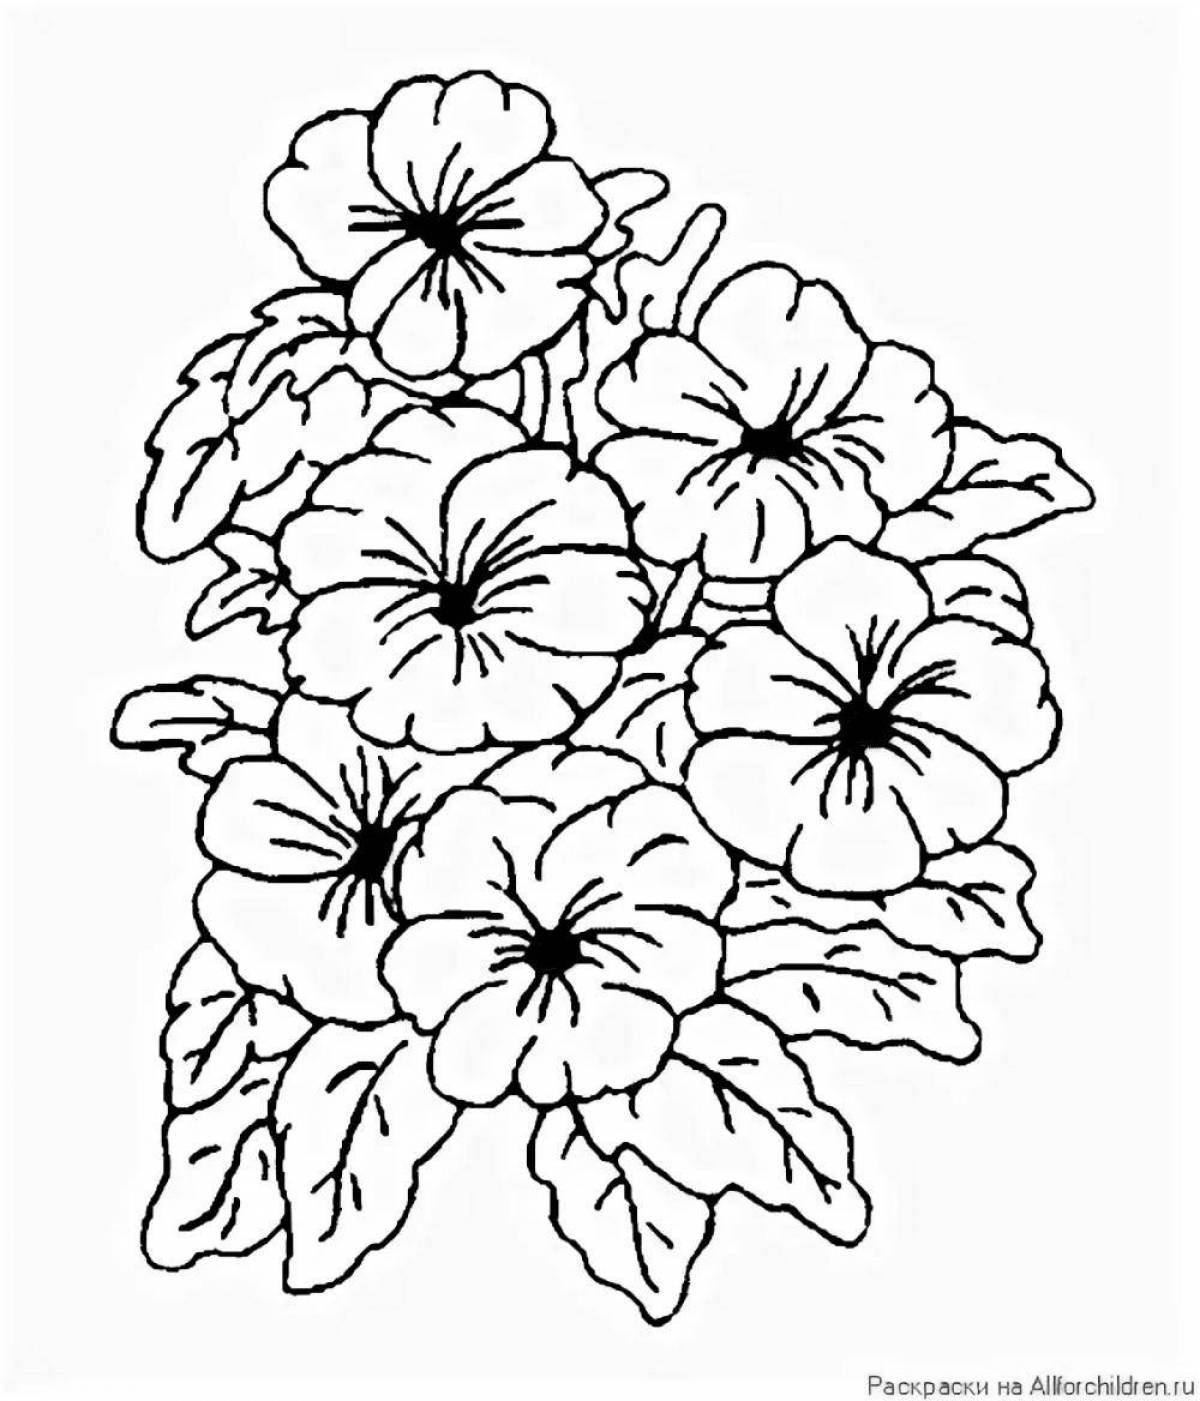 Outstanding geranium coloring page for kids